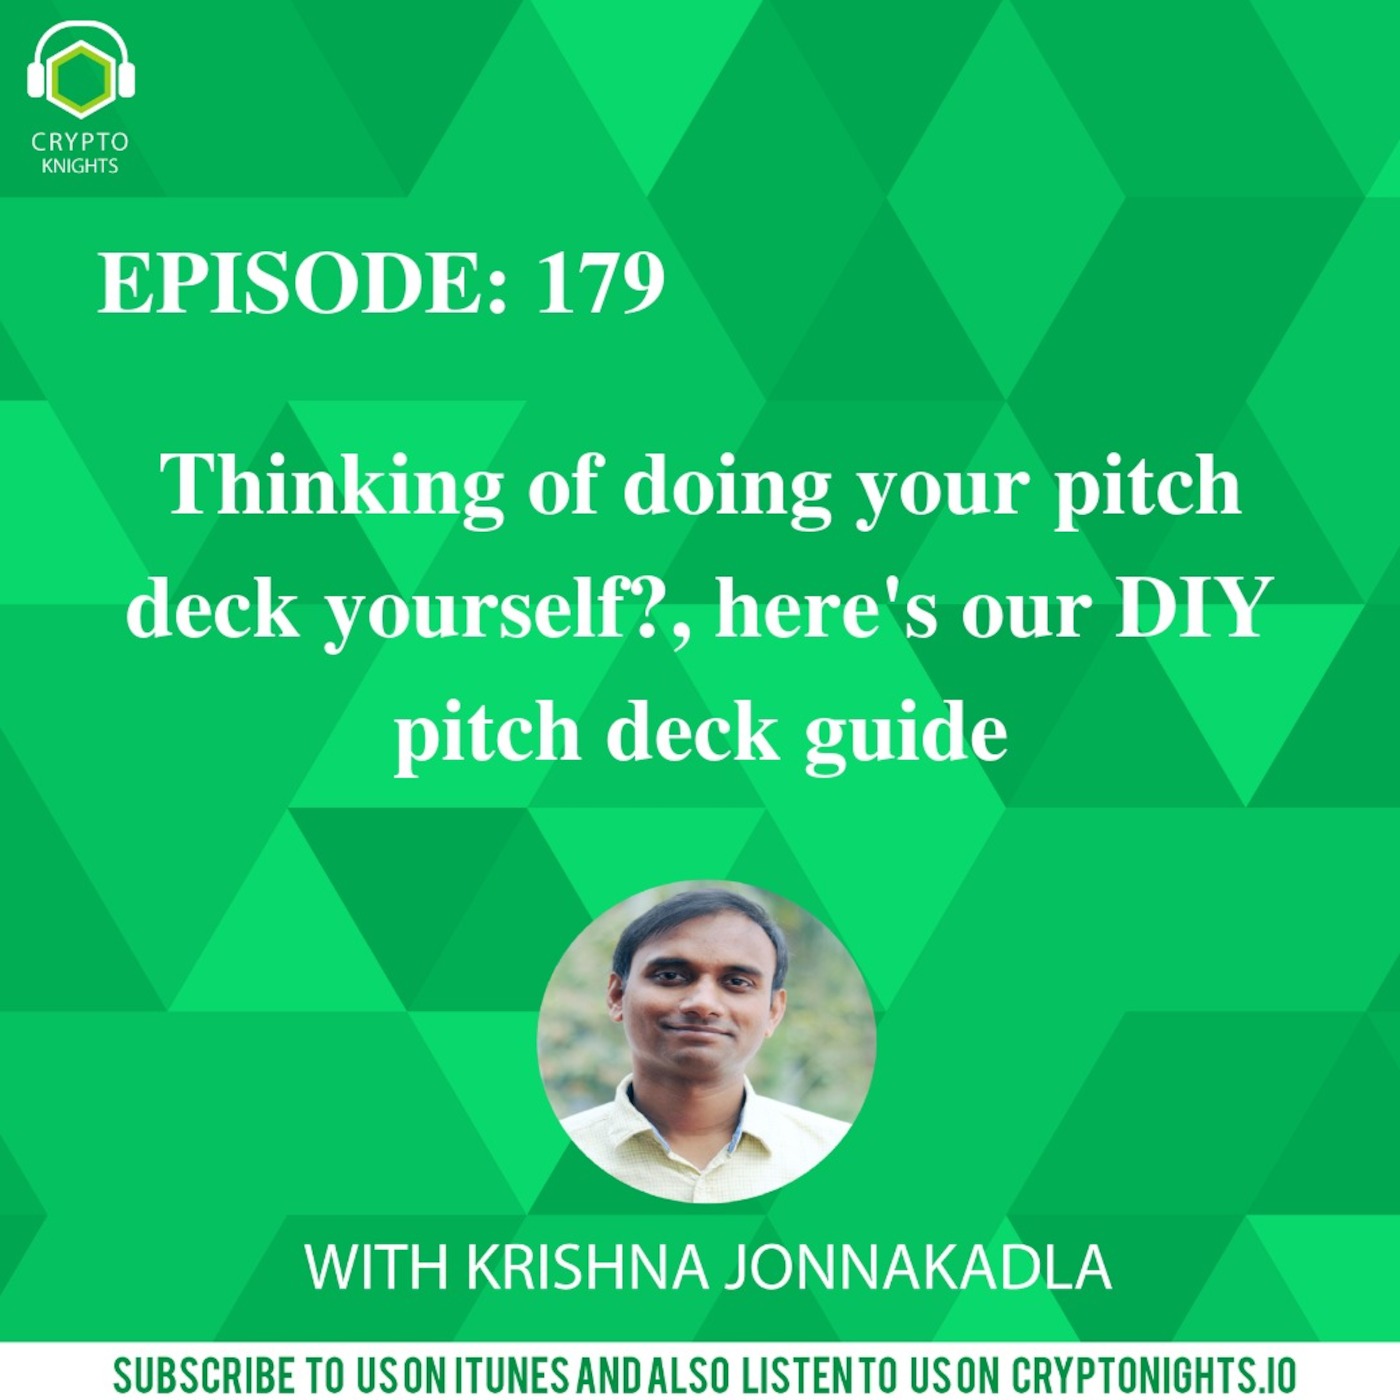 Episode 179: Thinking of doing your pitch deck yourself?, here's our DIY pitch deck guide